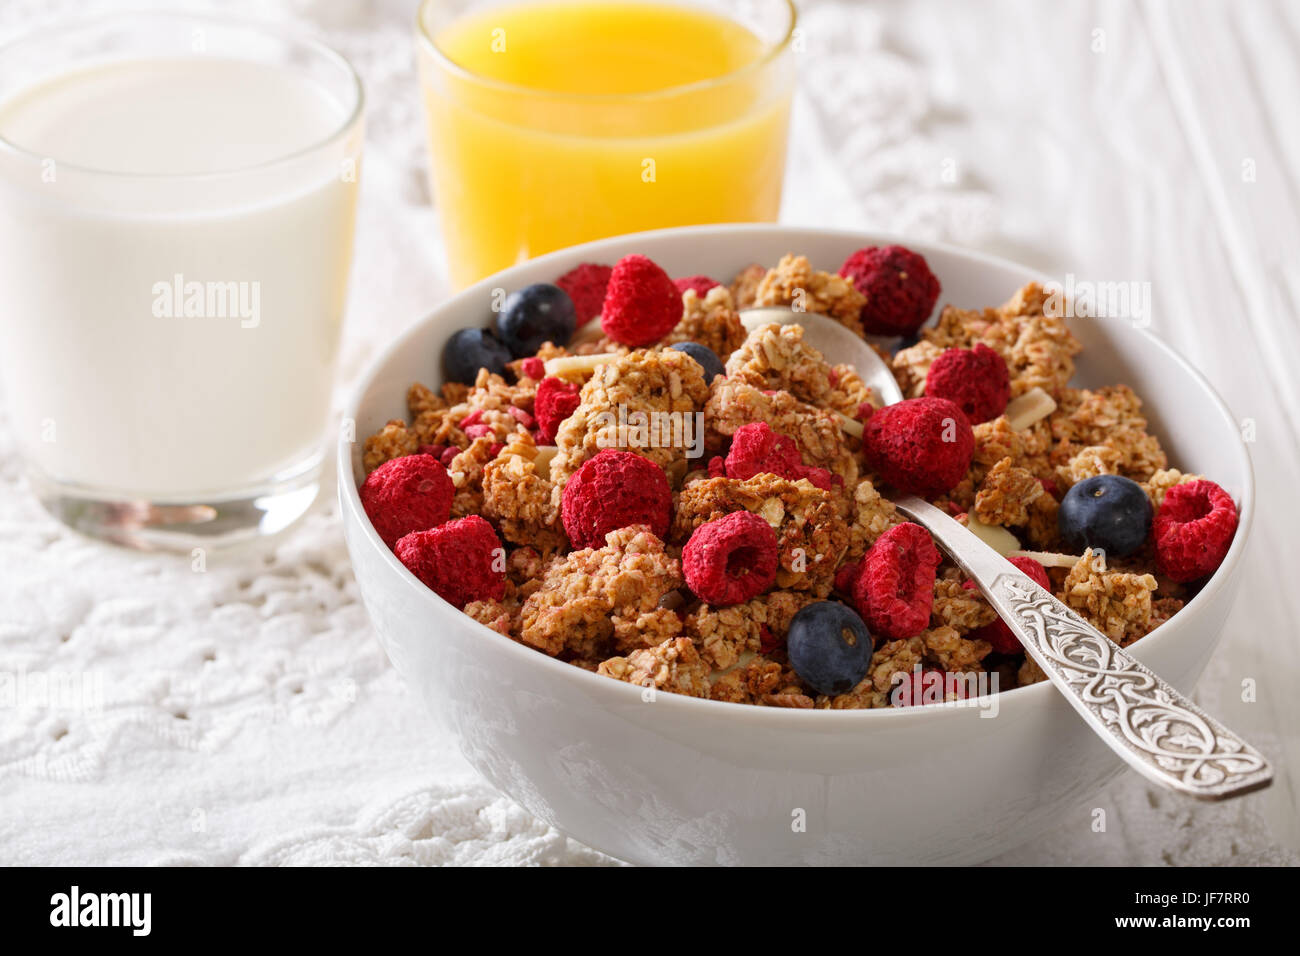 Granola with dried berries, milk and orange juice close-up on a table. horizontal Stock Photo